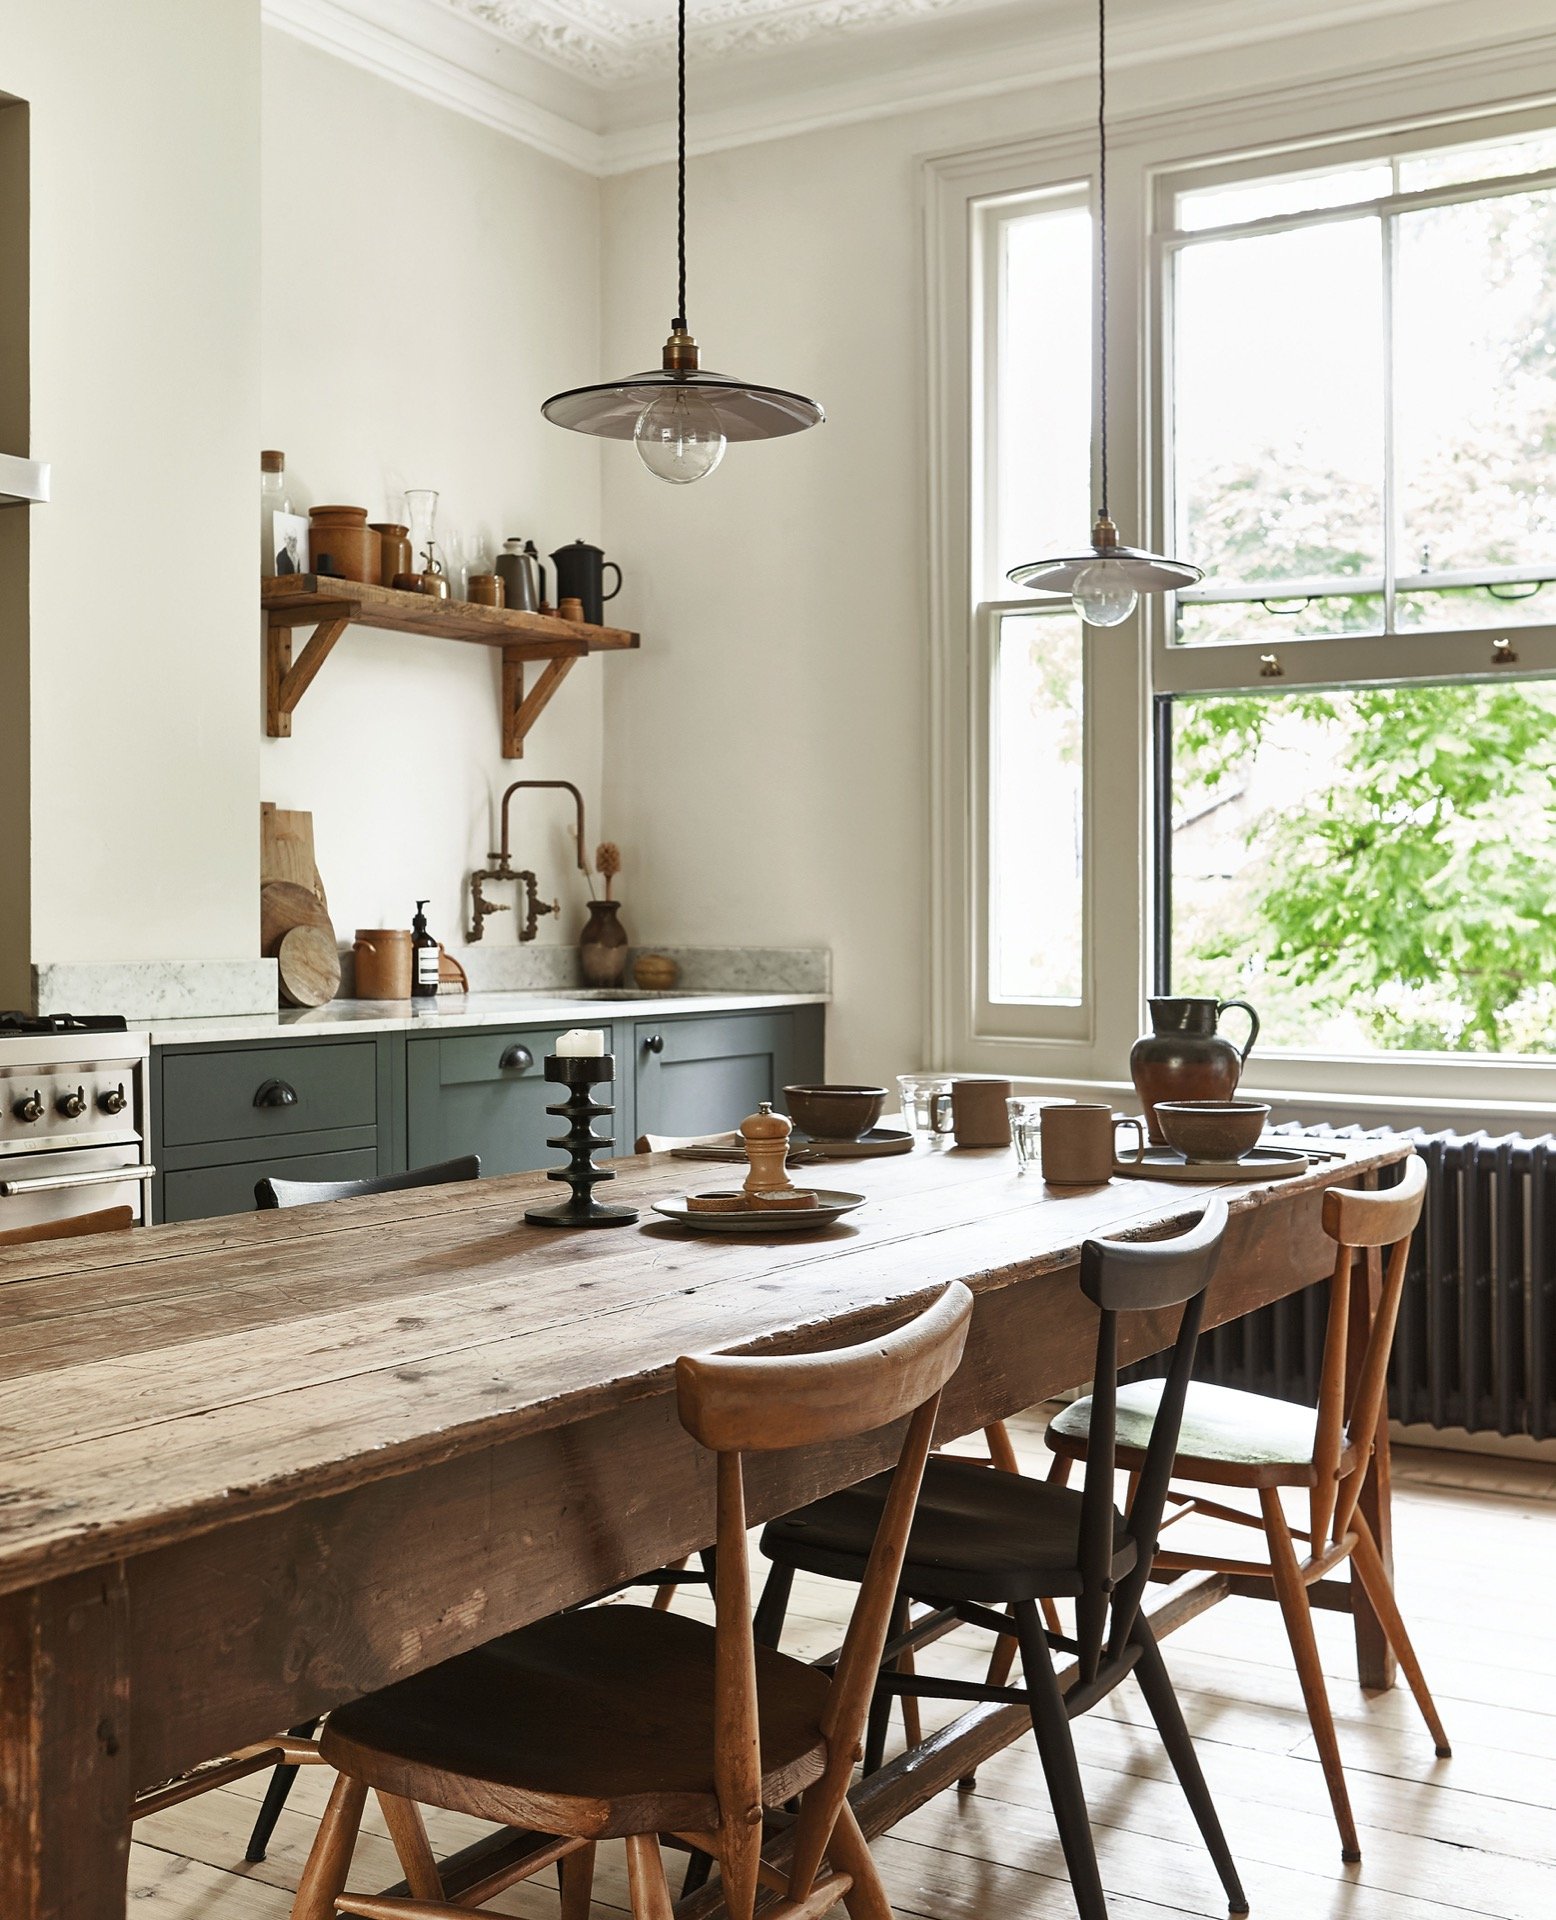 A pared back kitchen interior - old wooden table and open shelving